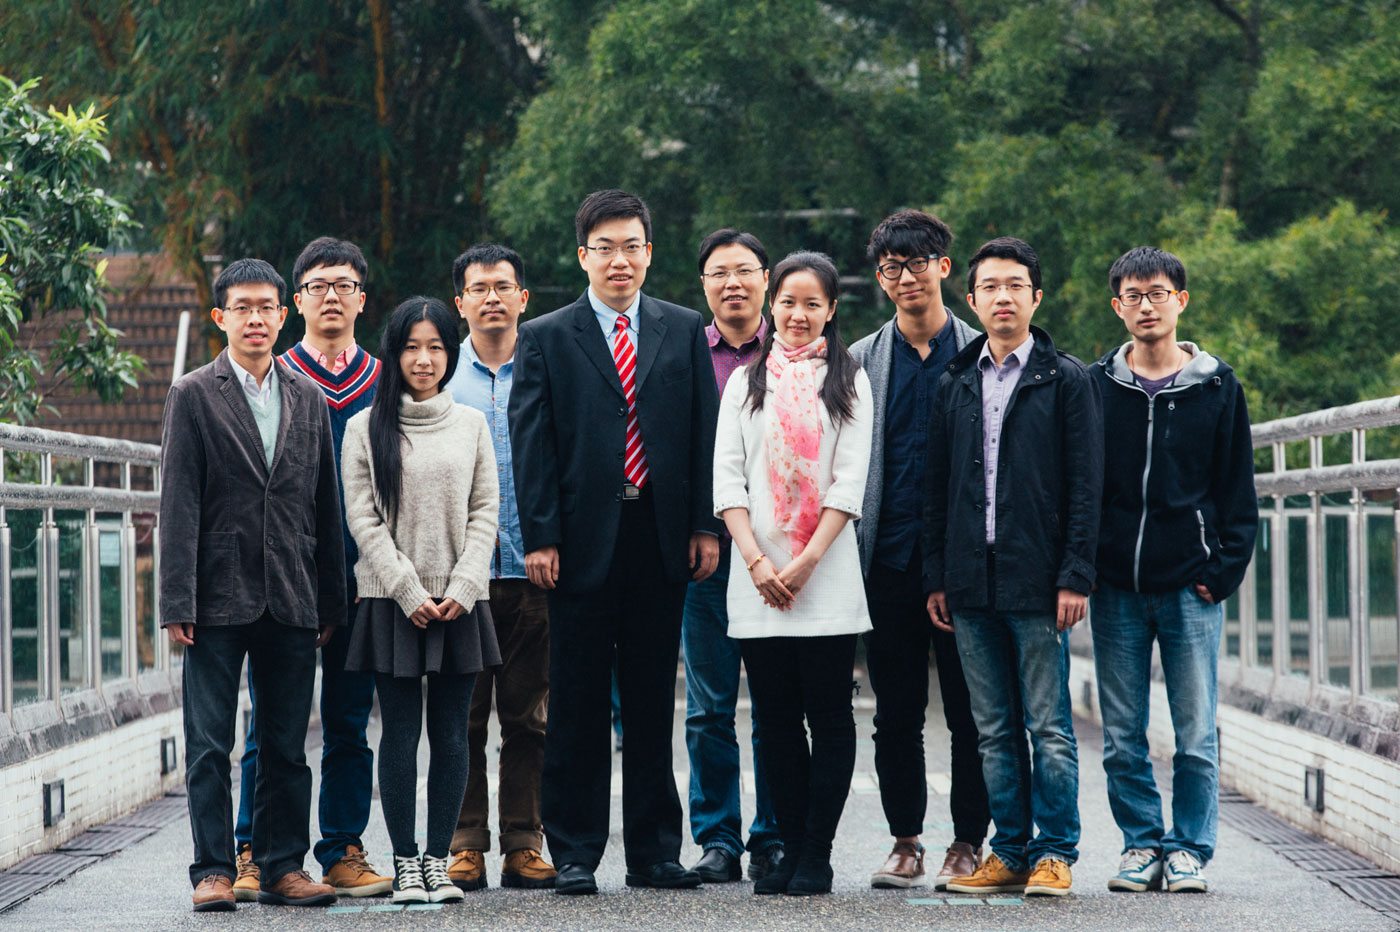 Professor Huang and his research students